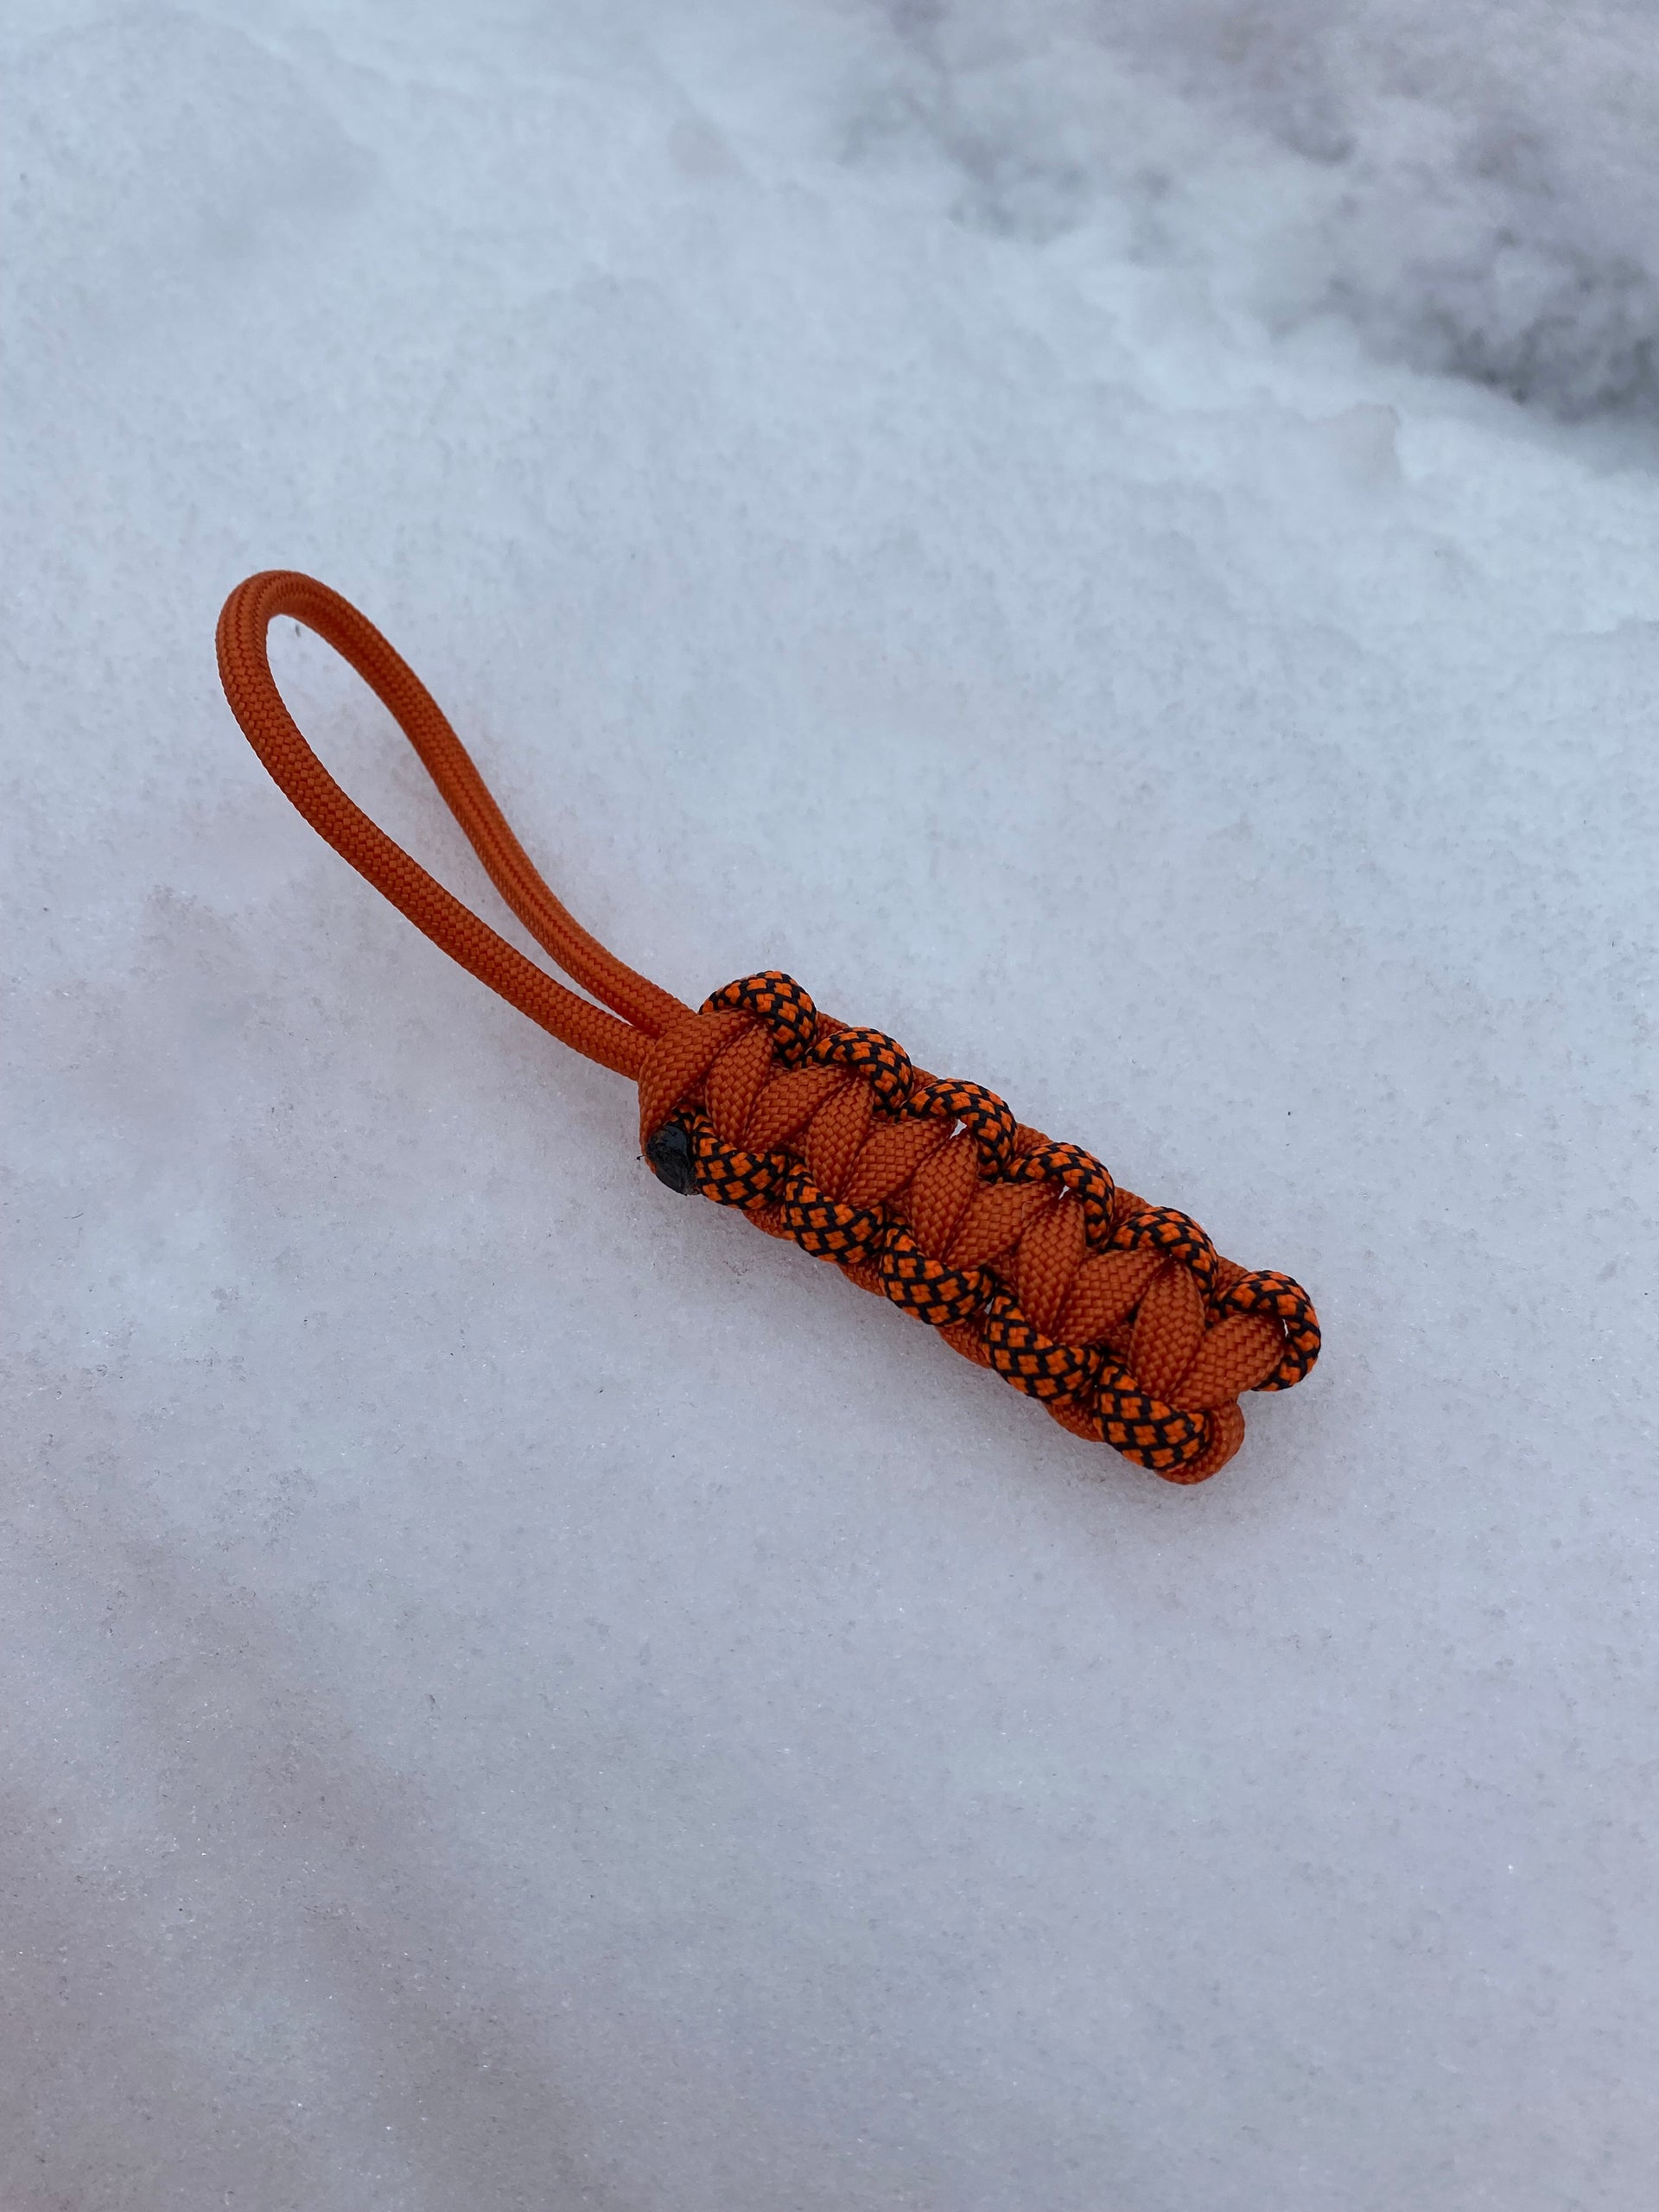 8 MORE Awesome Paracord Zipper Pulls, Easy Zipper Pull Ideas